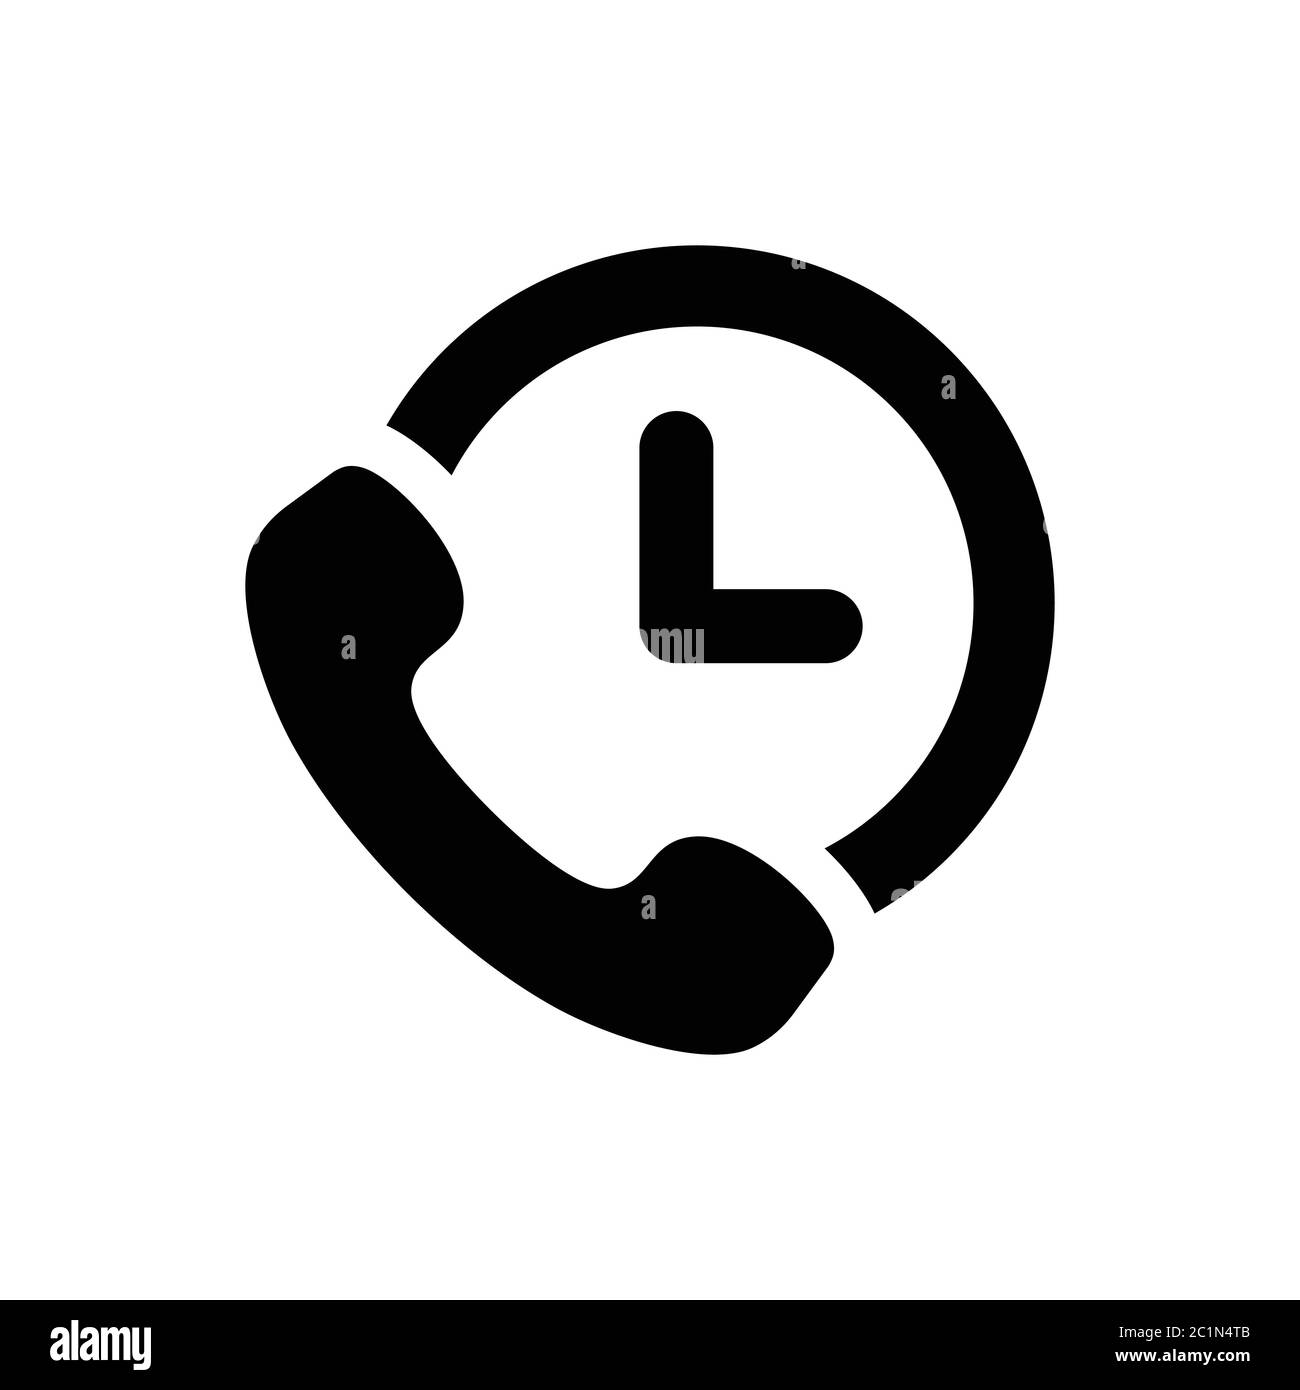 Vector illustration of phone hanger with clock icon. Suitable for illustration of customer service hotline number. Stock Vector